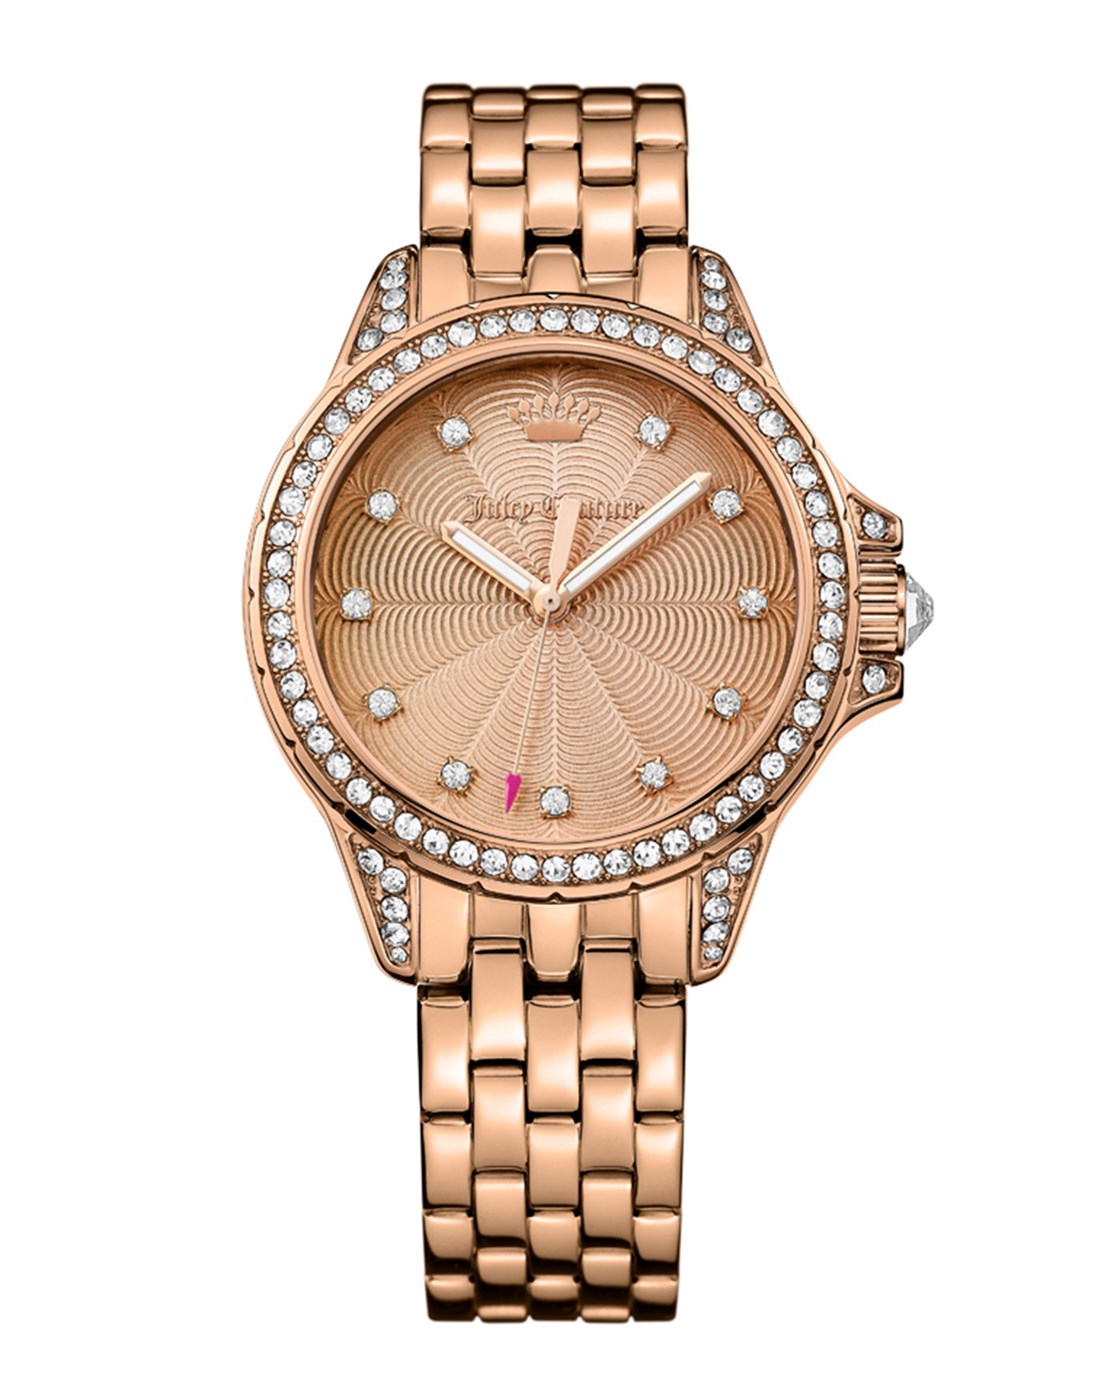 Juicy Couture Rose Gold Charlotte Watch